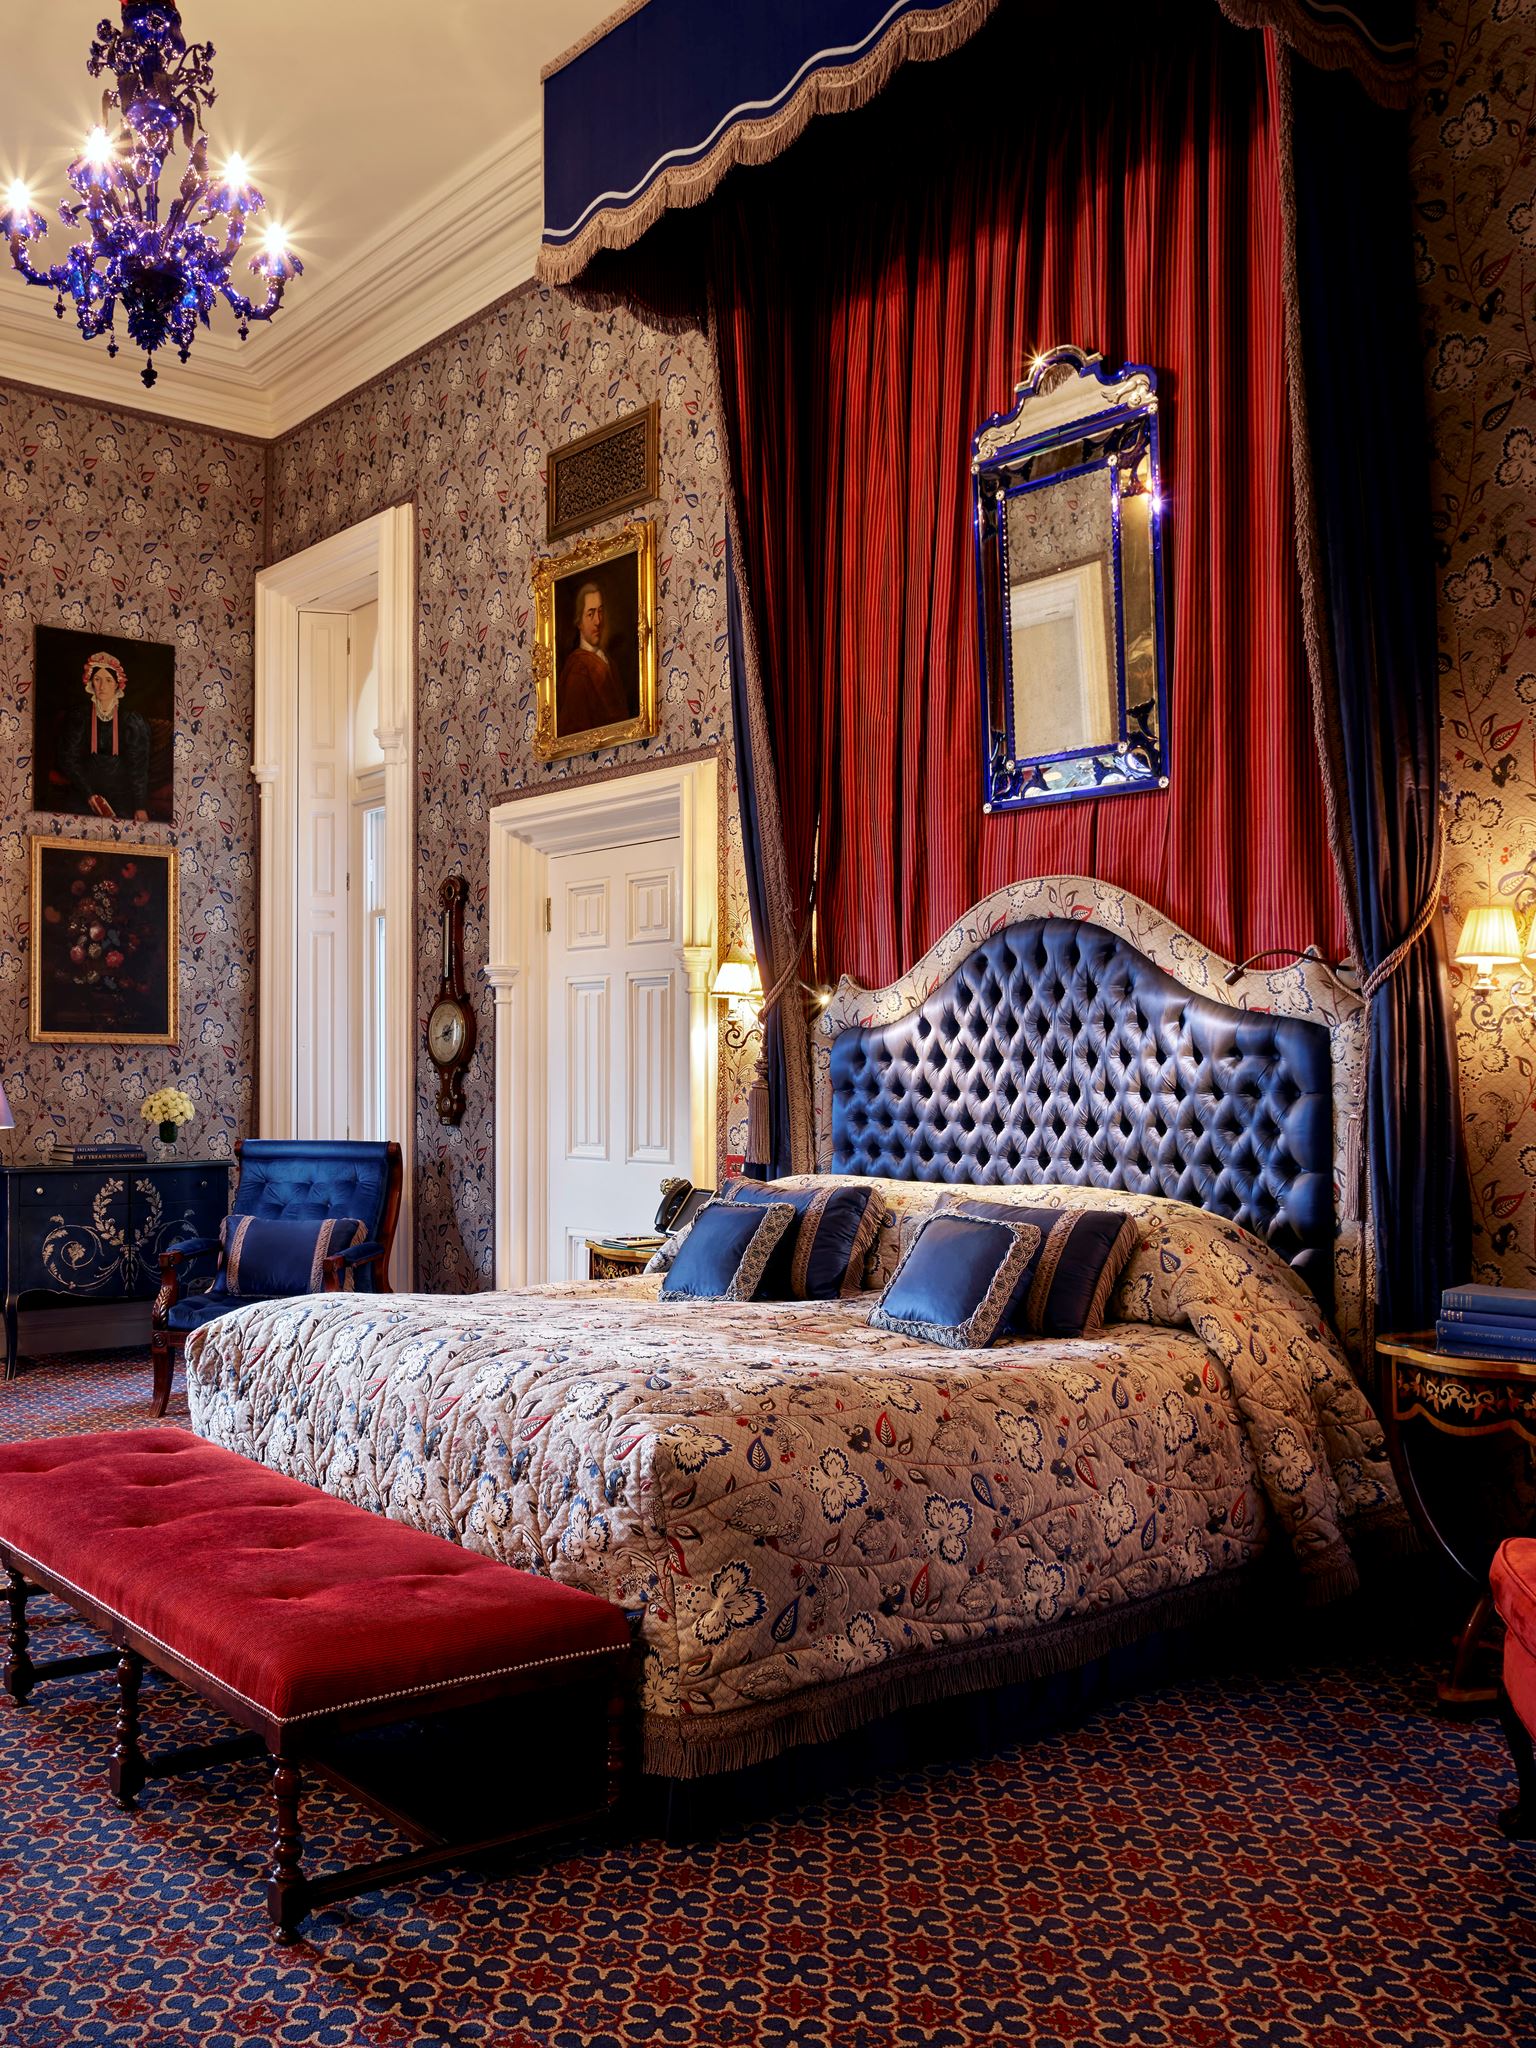 A masterclass: Not schmaltzy or untethered from reality, Ashford Castle